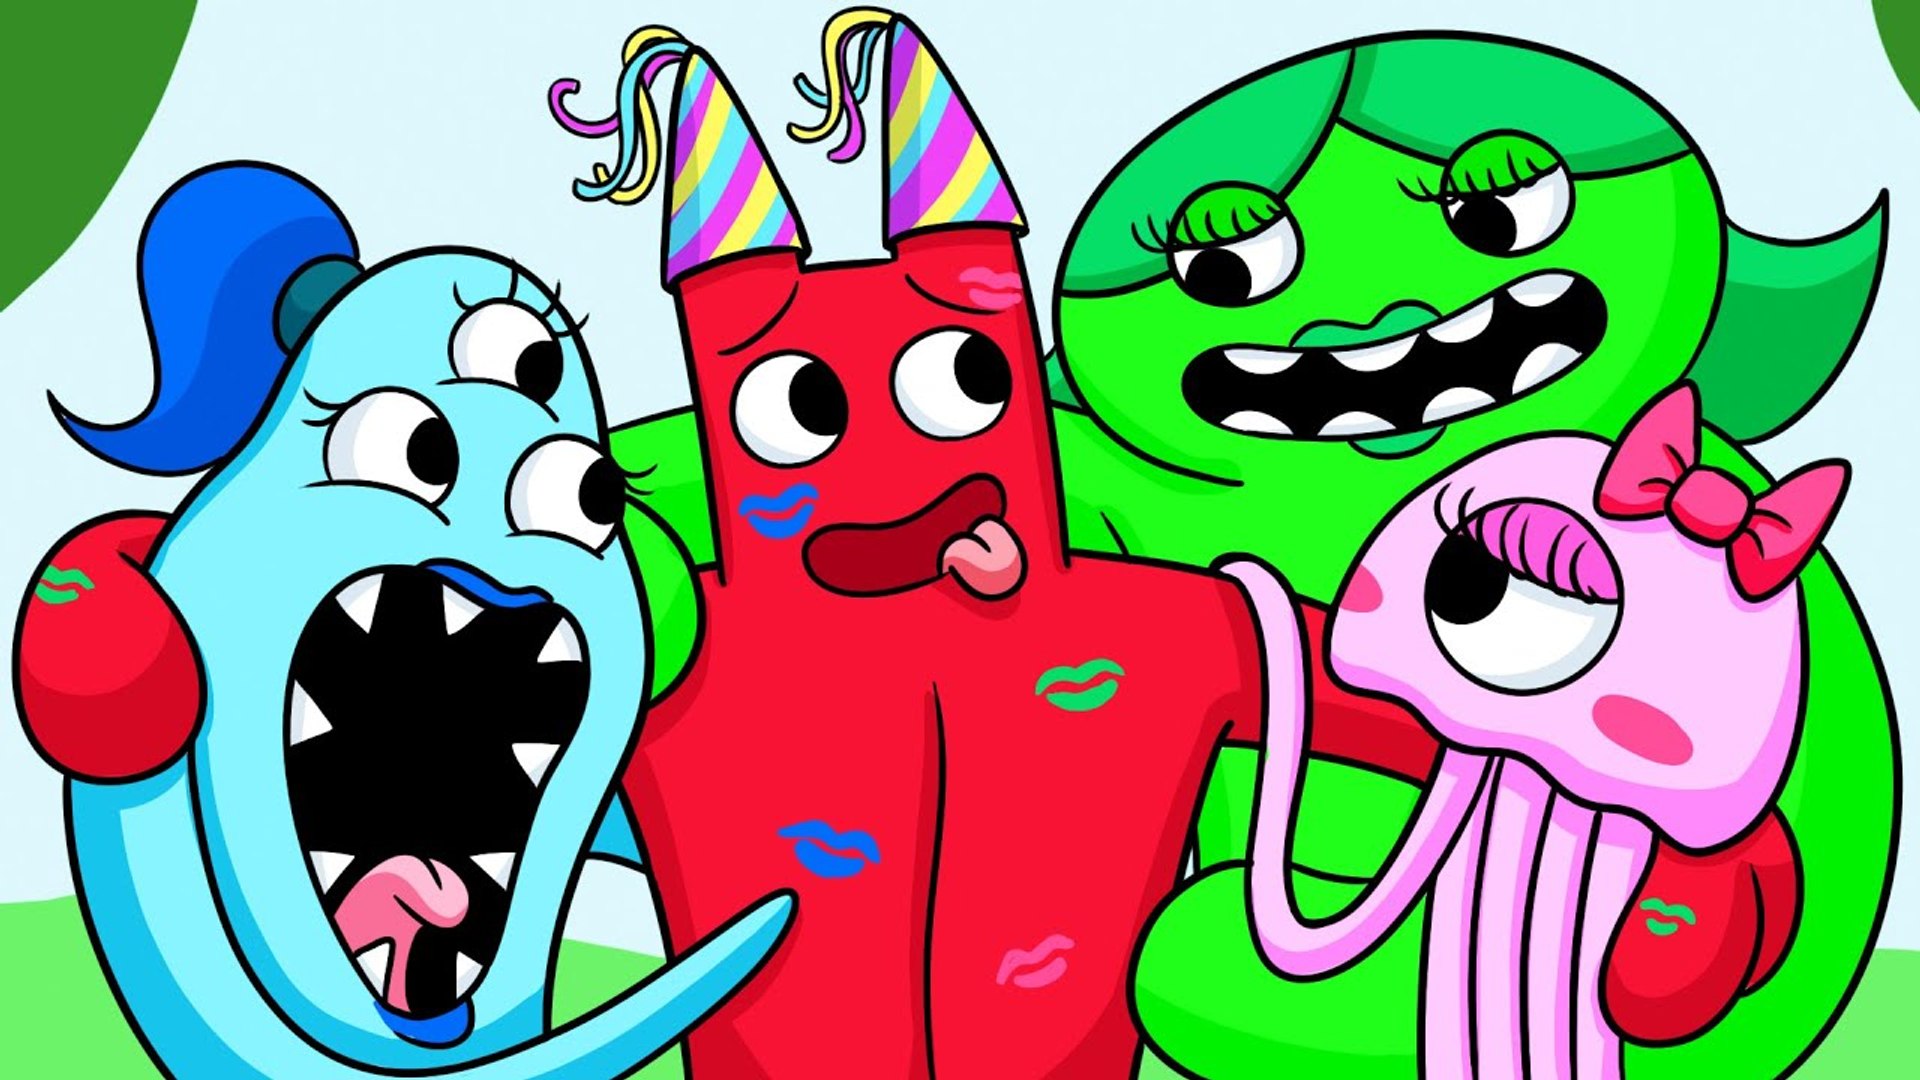 RAINBOW FRIENDS But Theyre GIRLS Cartoon Animation - video Dailymotion